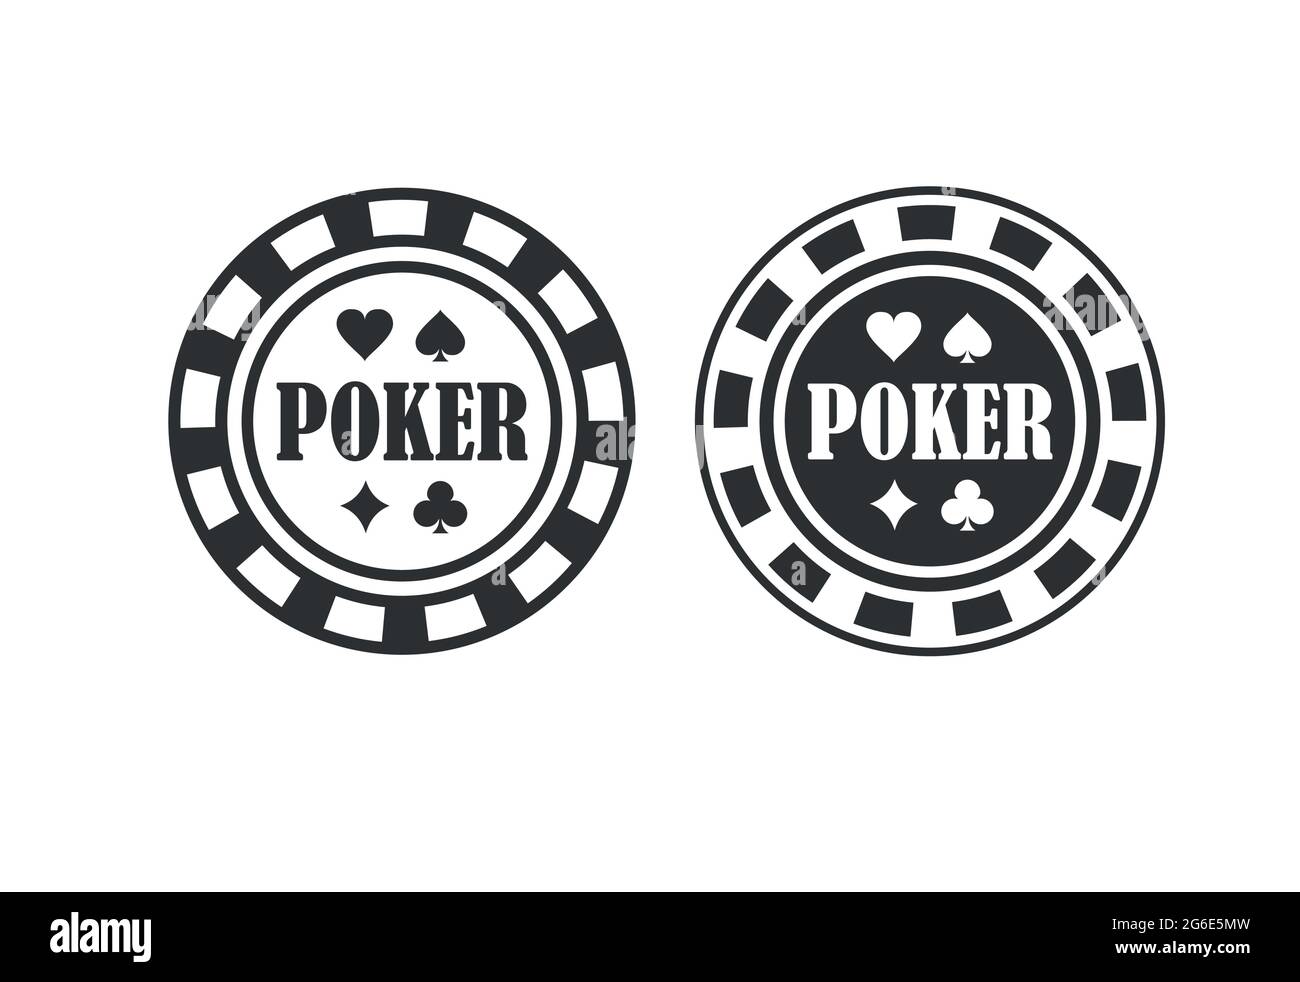 Poker Chip Queen SVG, Texas Holdem, Clubs Playing Card, Gambling, Casino Betting Stock Vector